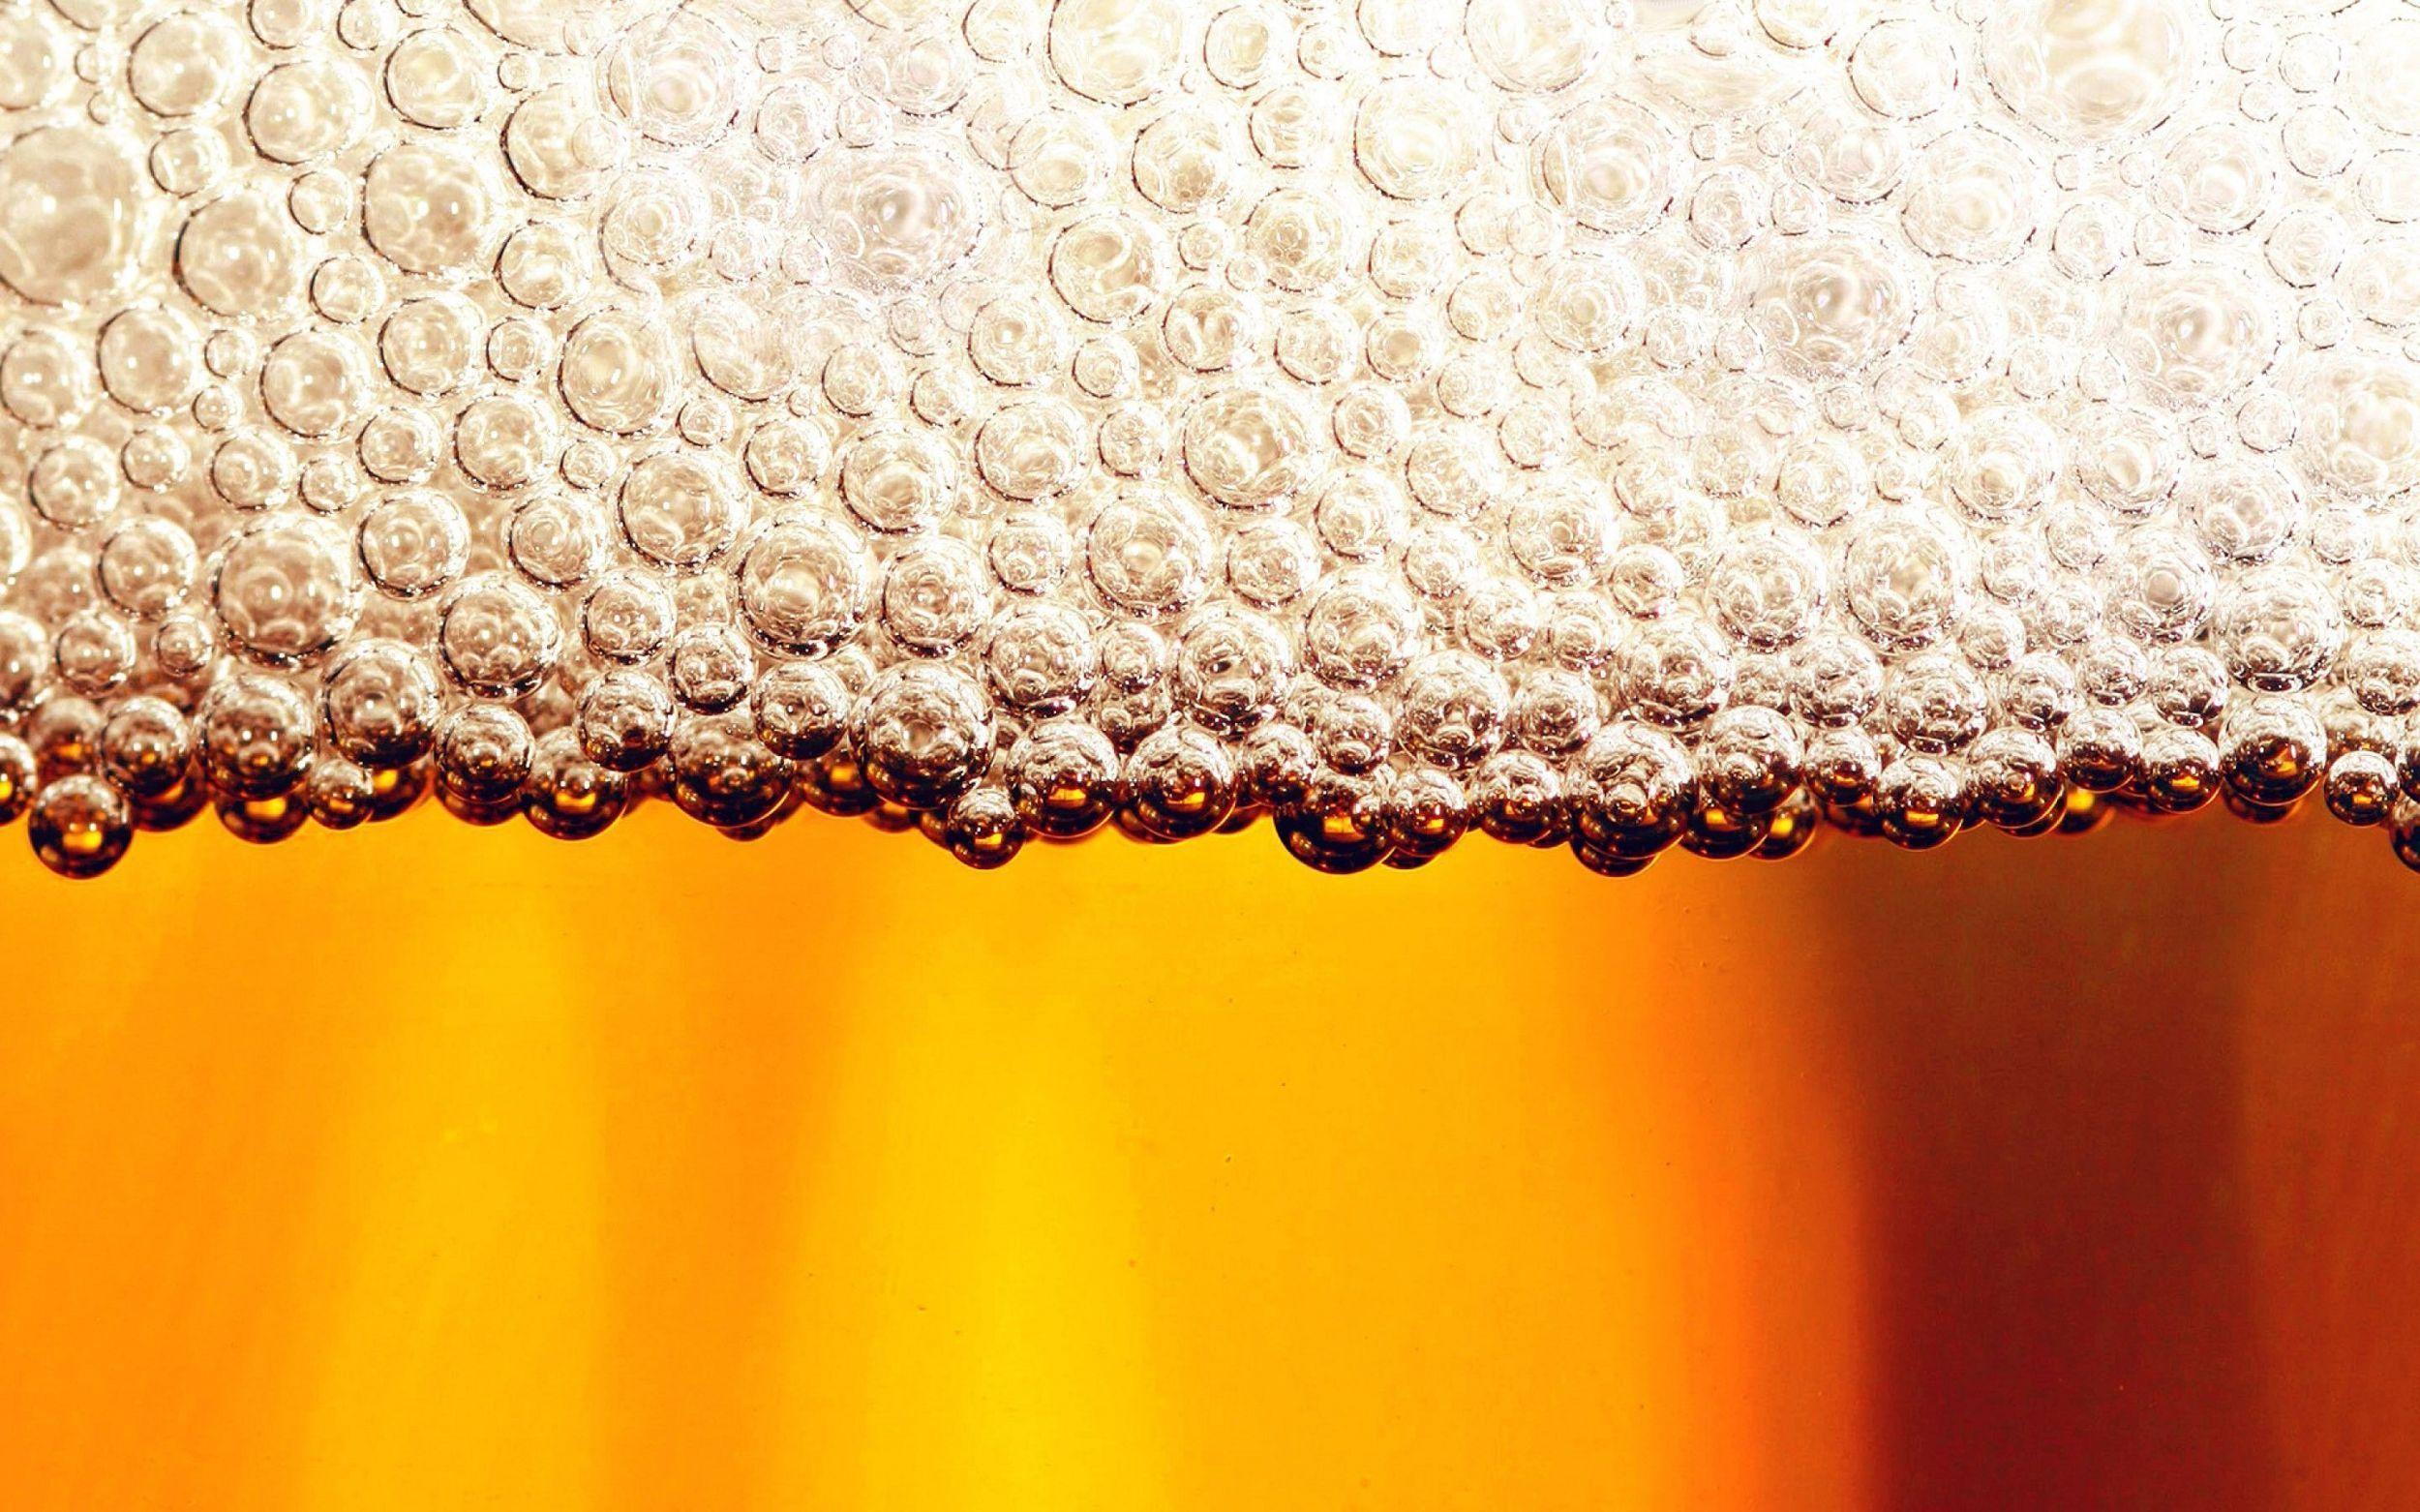 4k Ultra Beer HD Quality Wallpaper for mobile and desktop